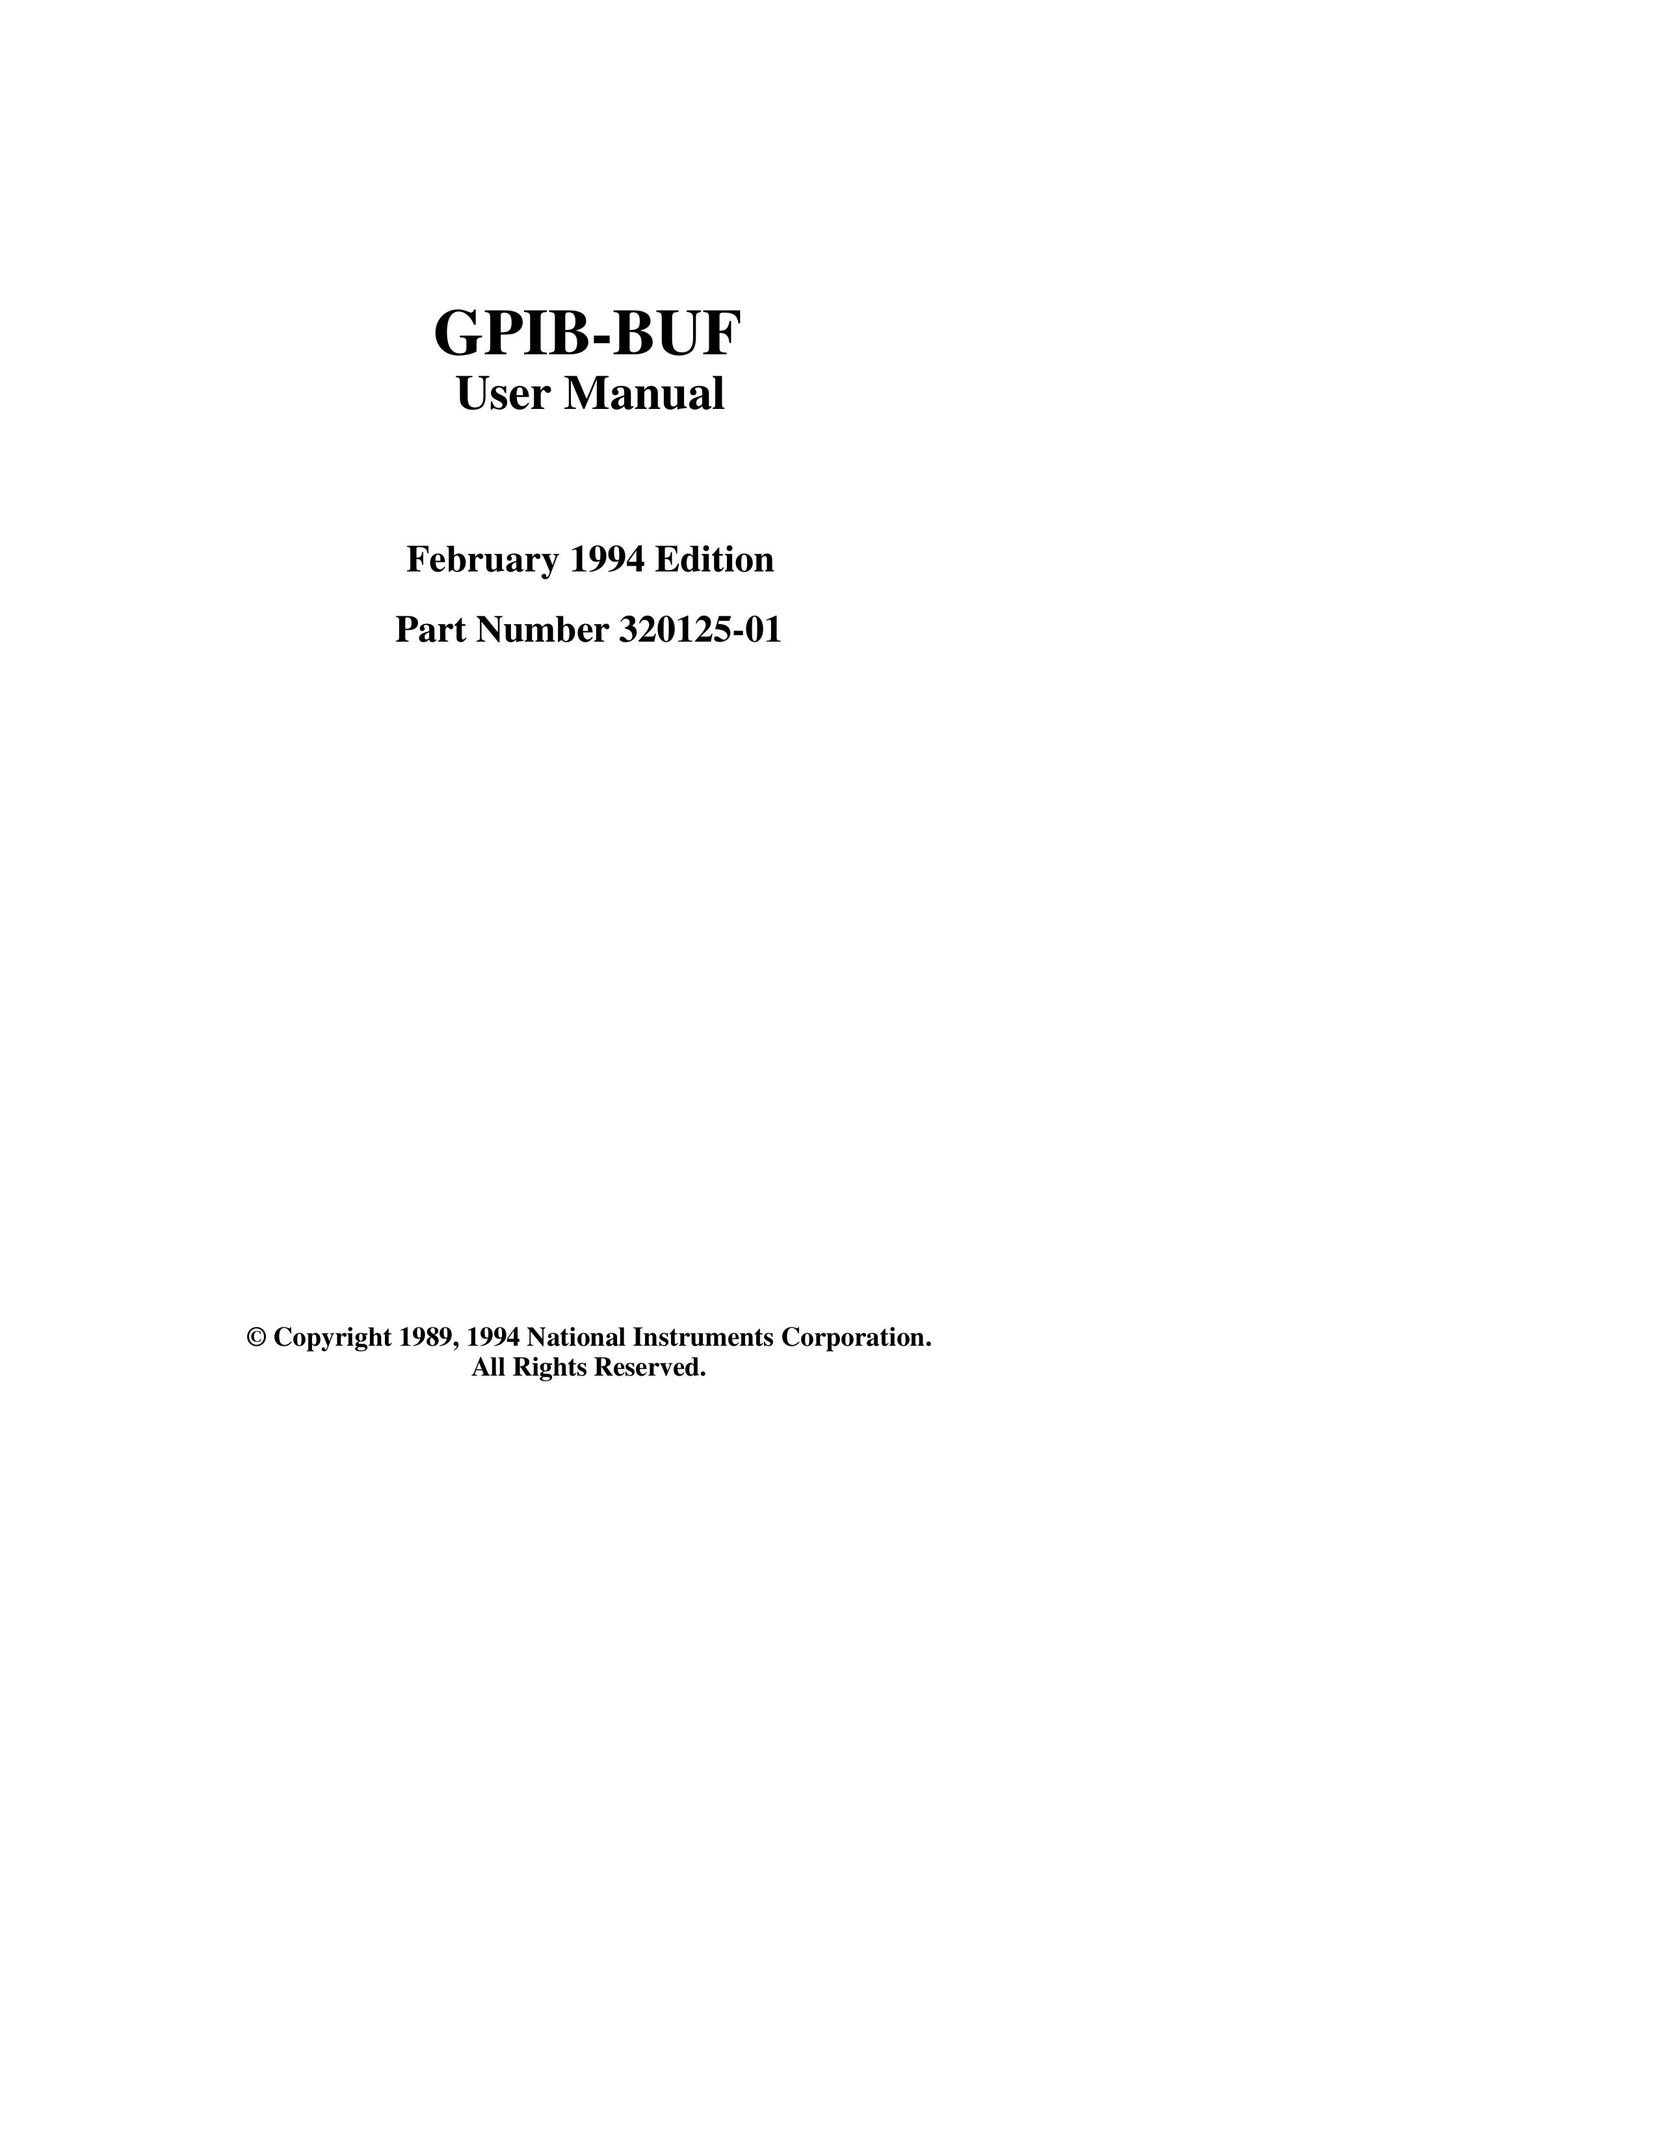 National Instruments GPIB-BUF Switch User Manual